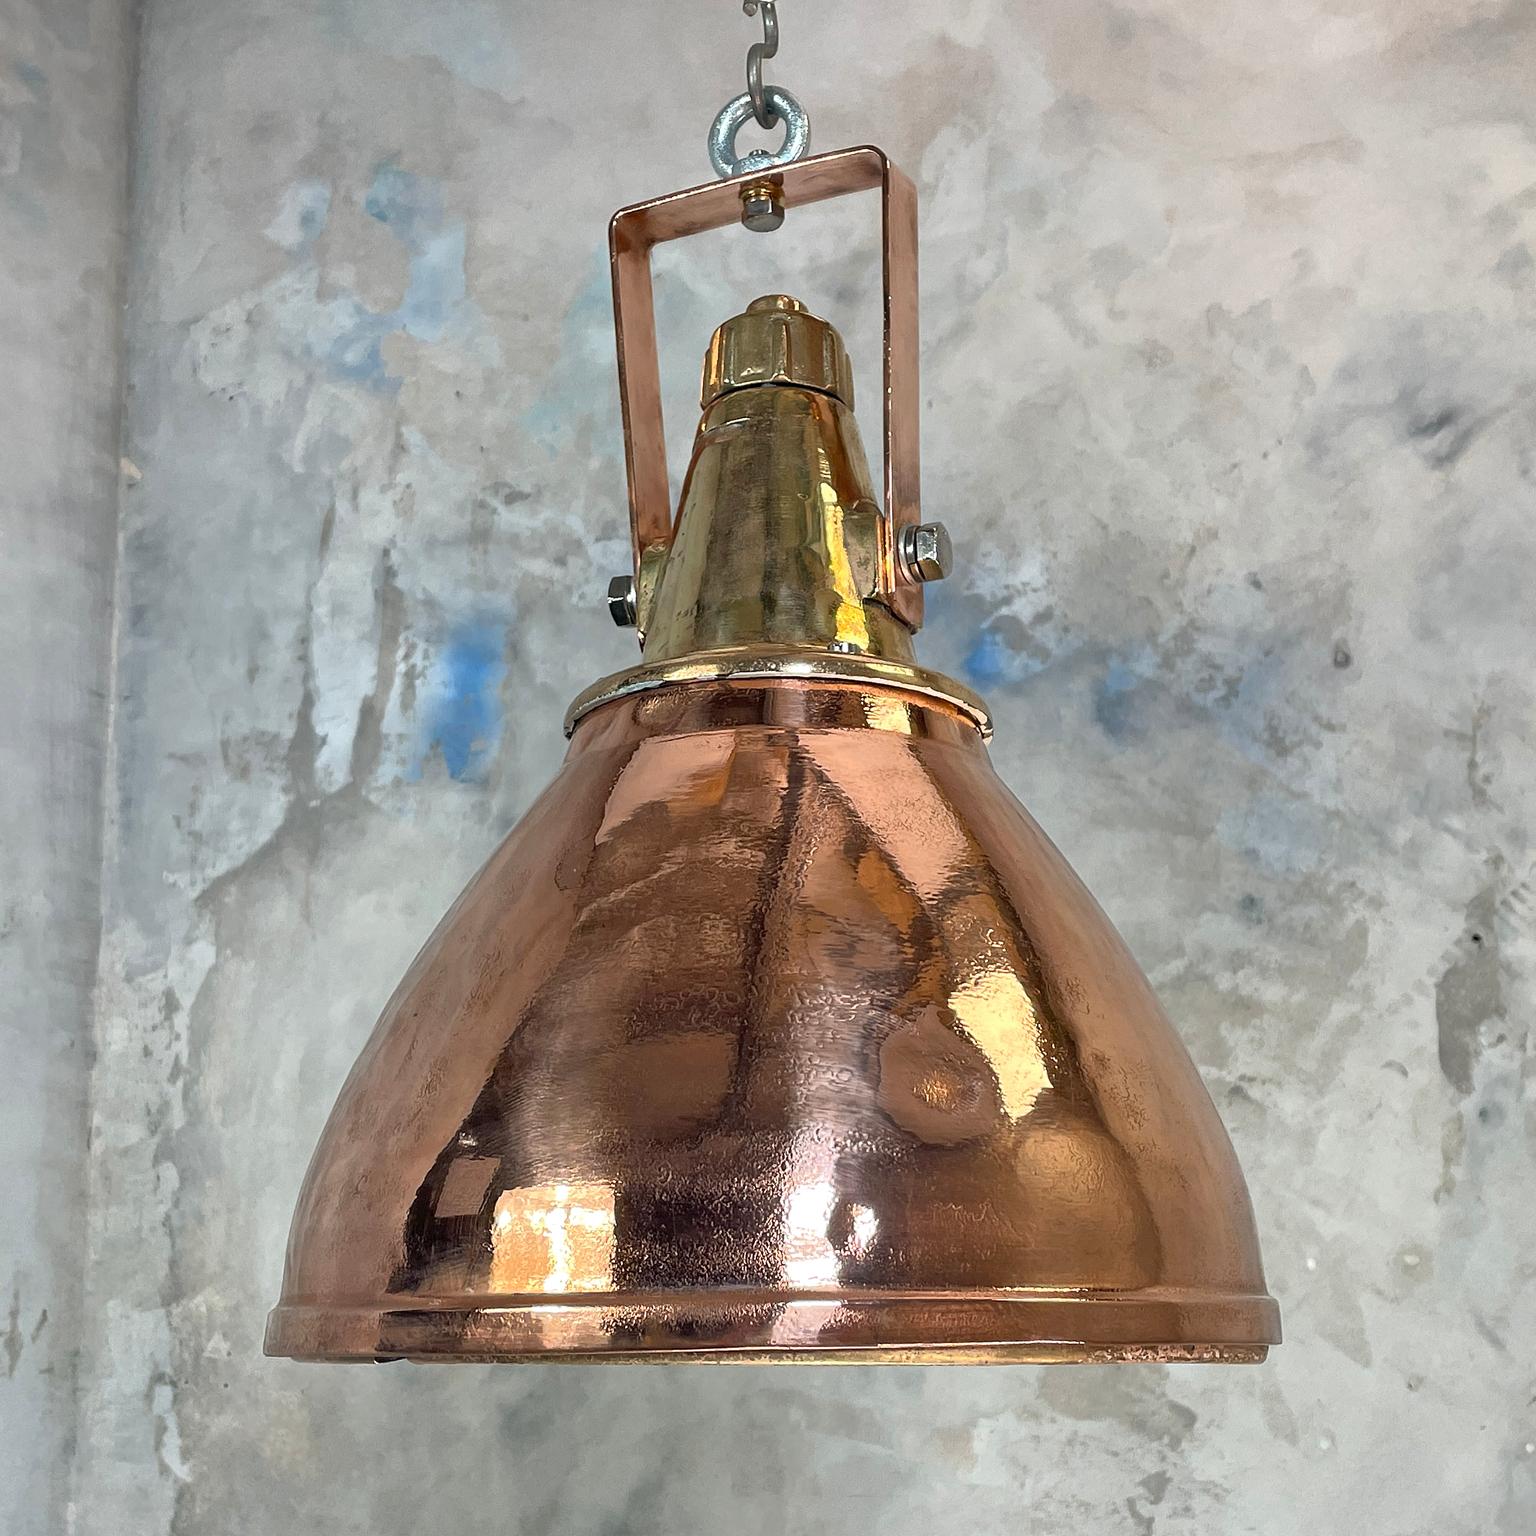 1970s German Copper & Brass Industrial Ceiling Pendant Light with Beam Focus 1